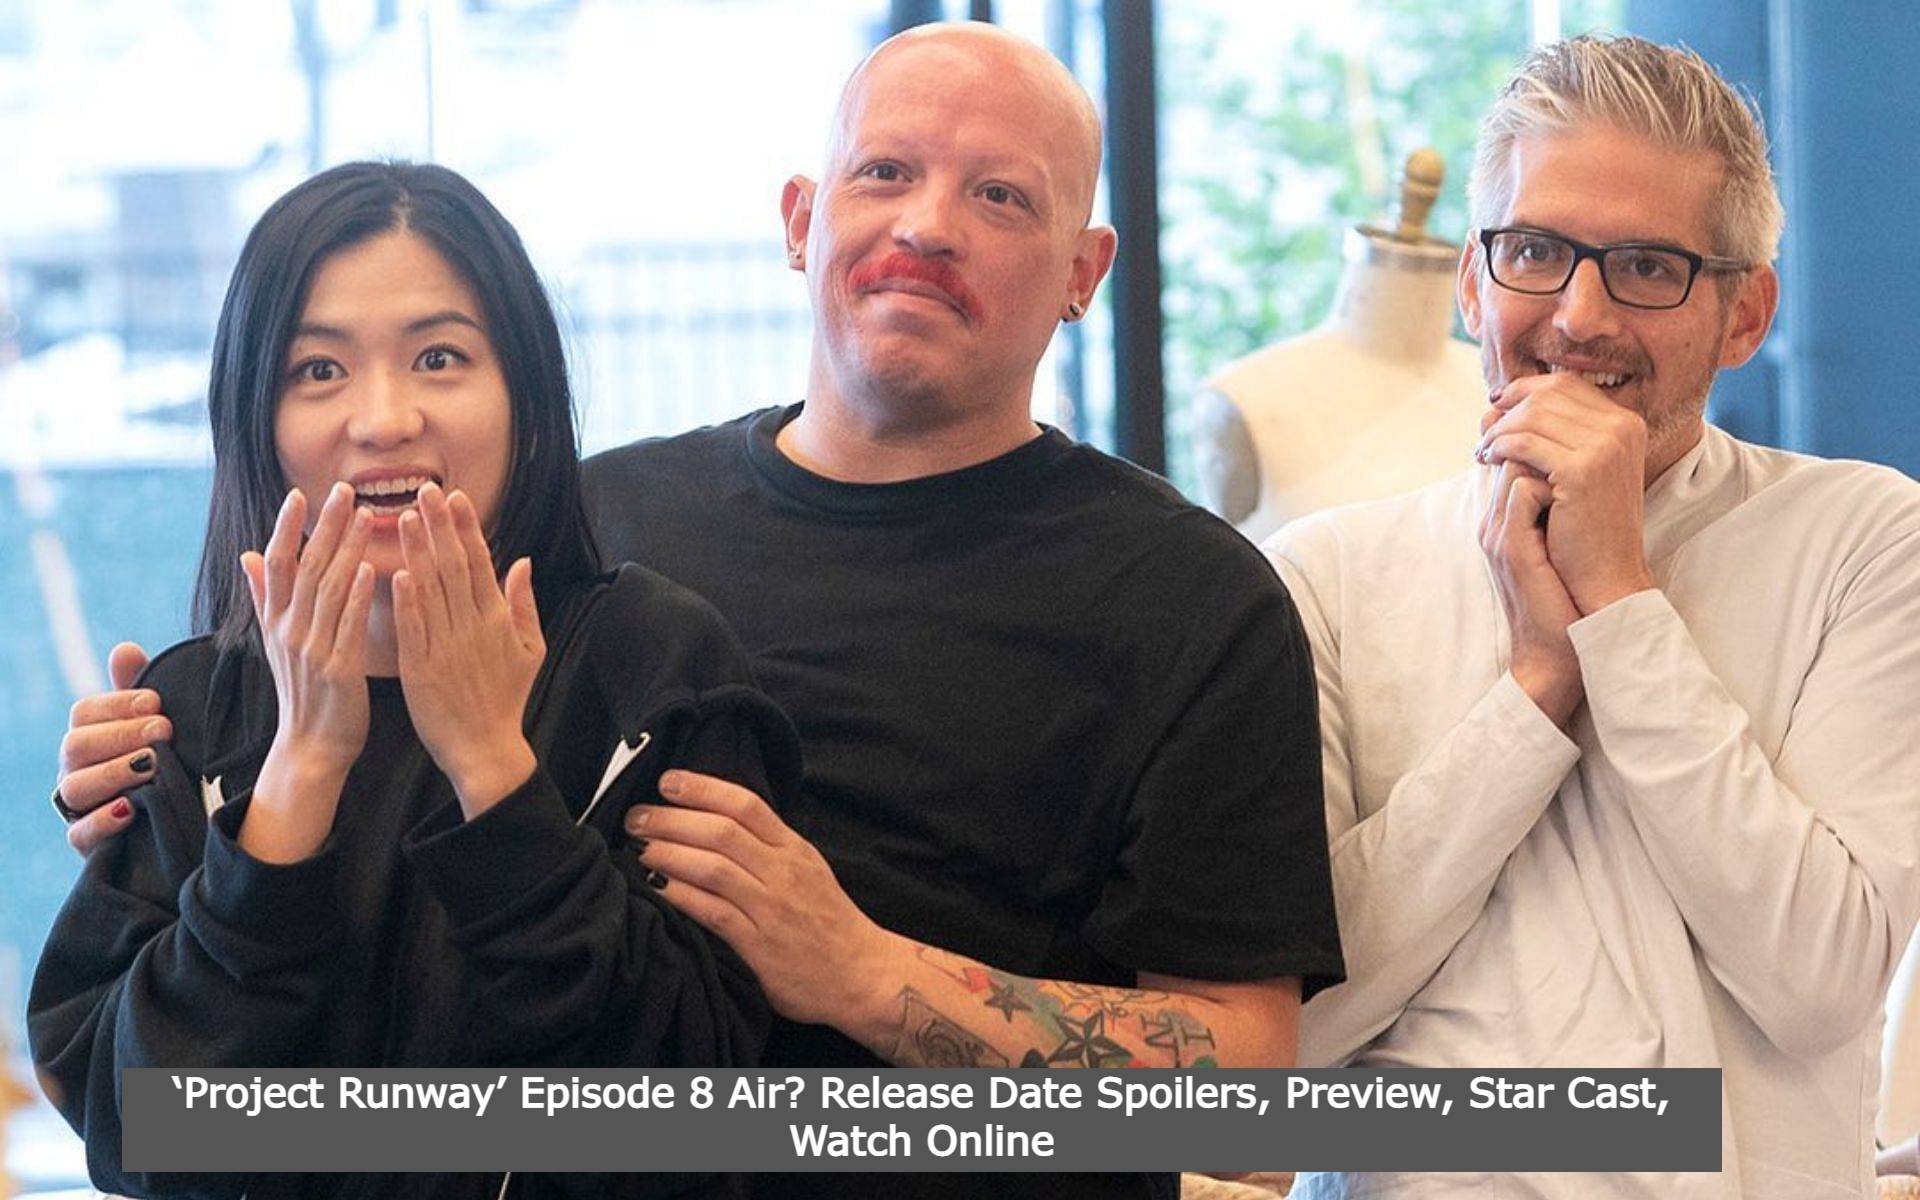 ‘Project Runway’ Episode 8 Air? Release Date Spoilers, Preview, Star Cast, Watch Online